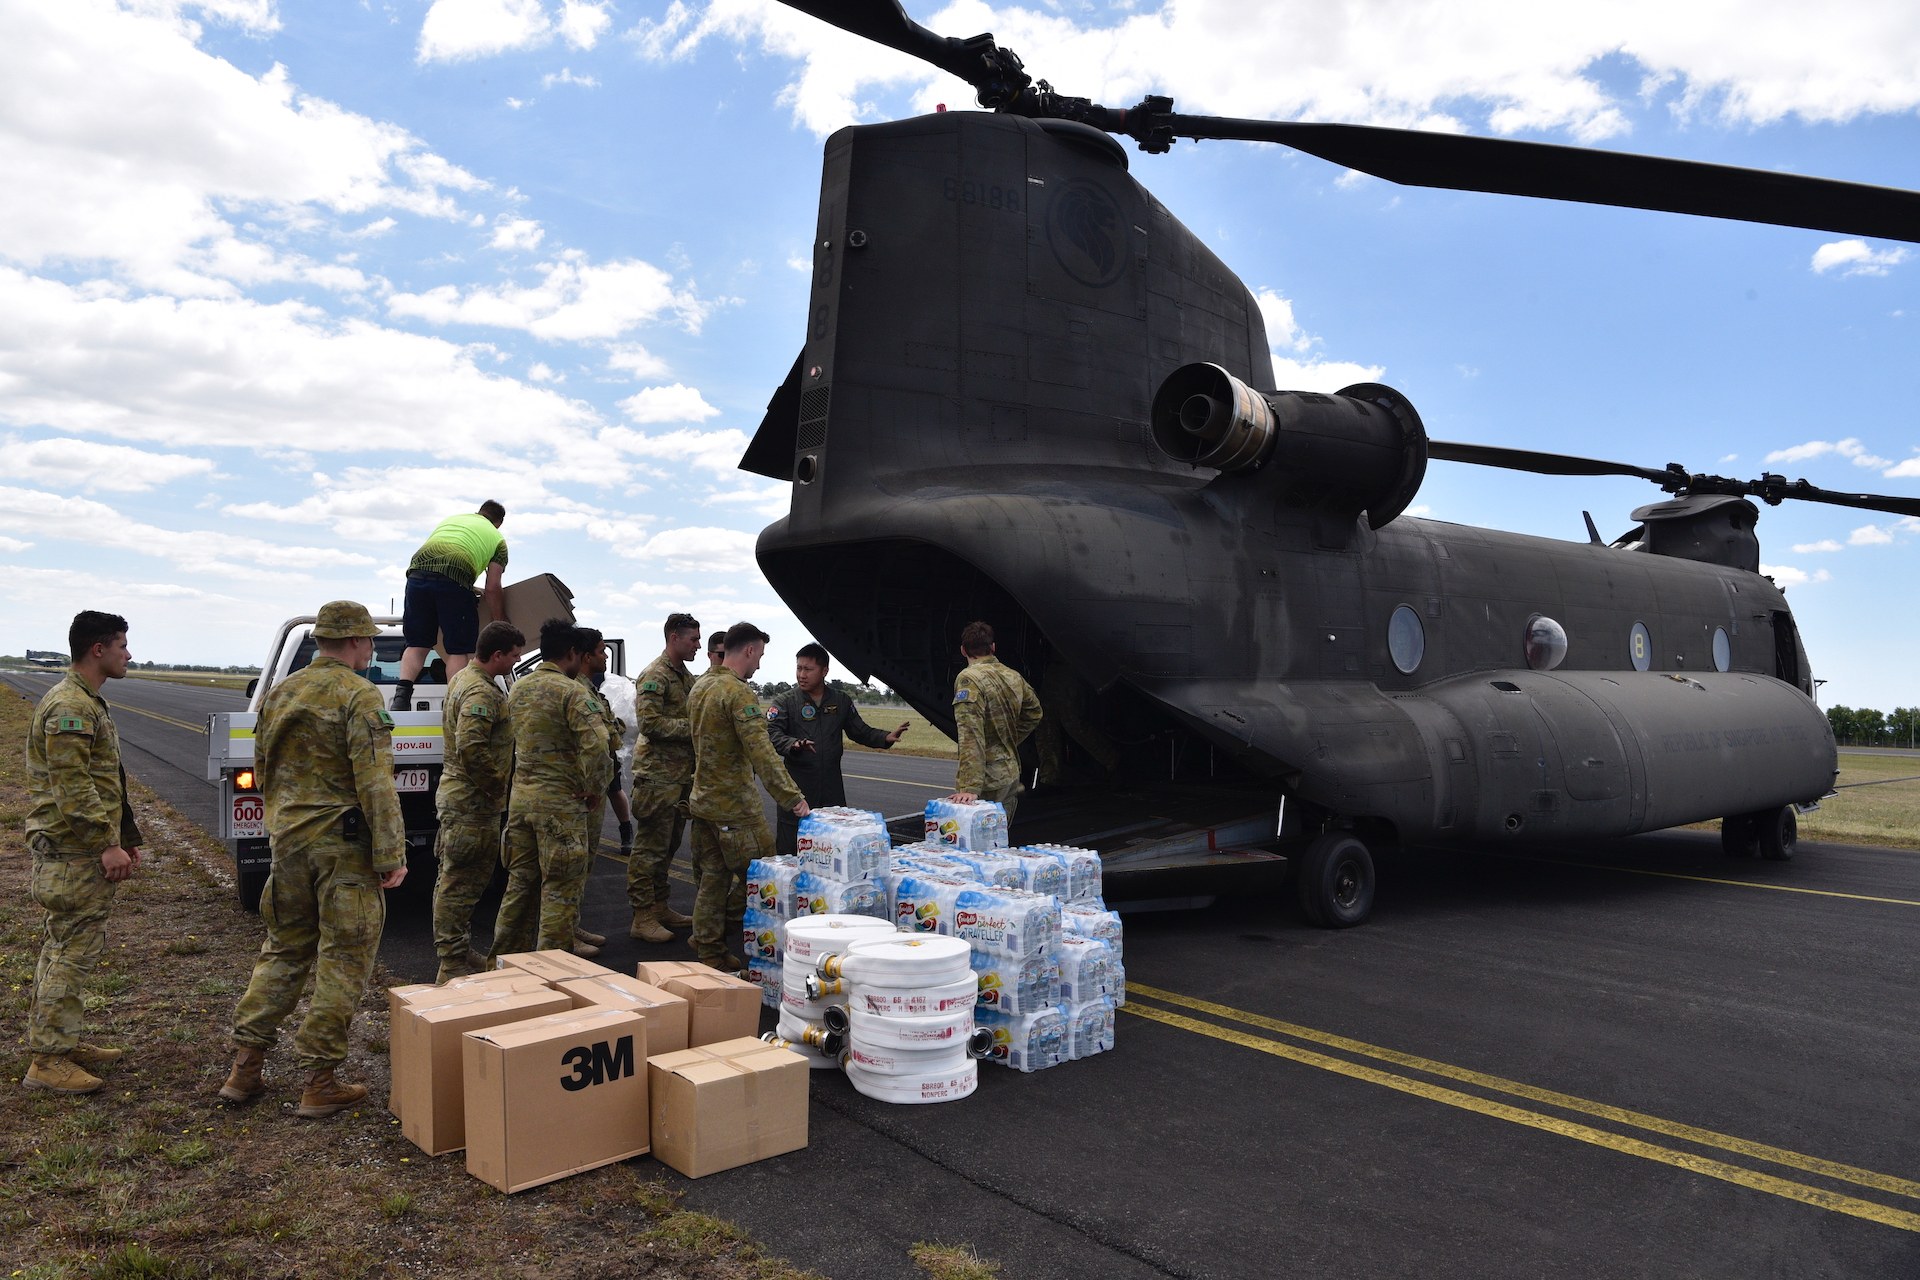 SAF personnel recognised for role in bushfire relief, counter-terrorism